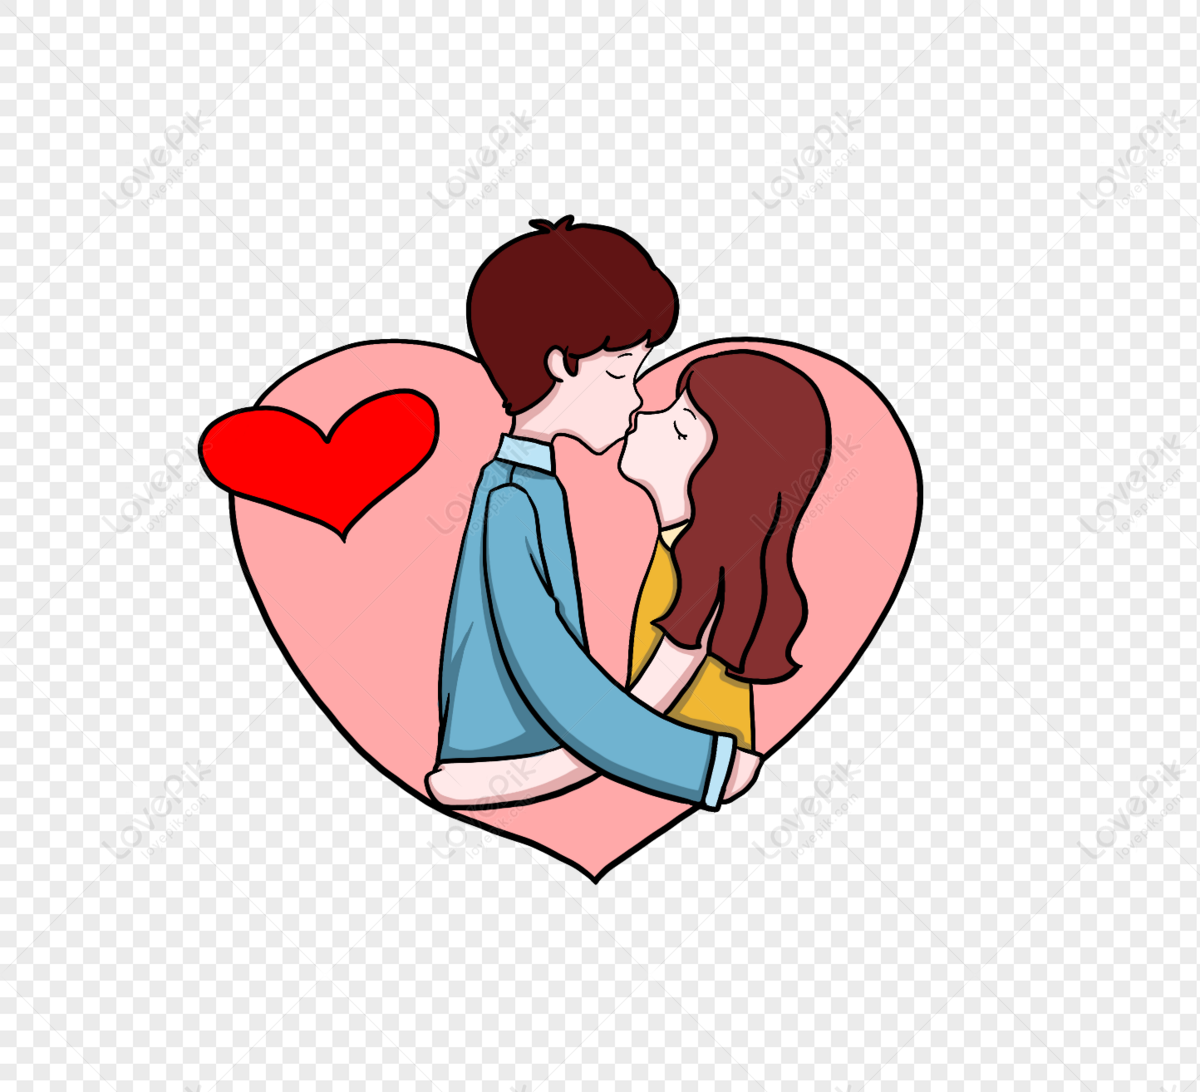 Cartoon Hand Drawn Romantic Valentine Couple Sweet Kiss Free PNG And  Clipart Image For Free Download - Lovepik | 401276649